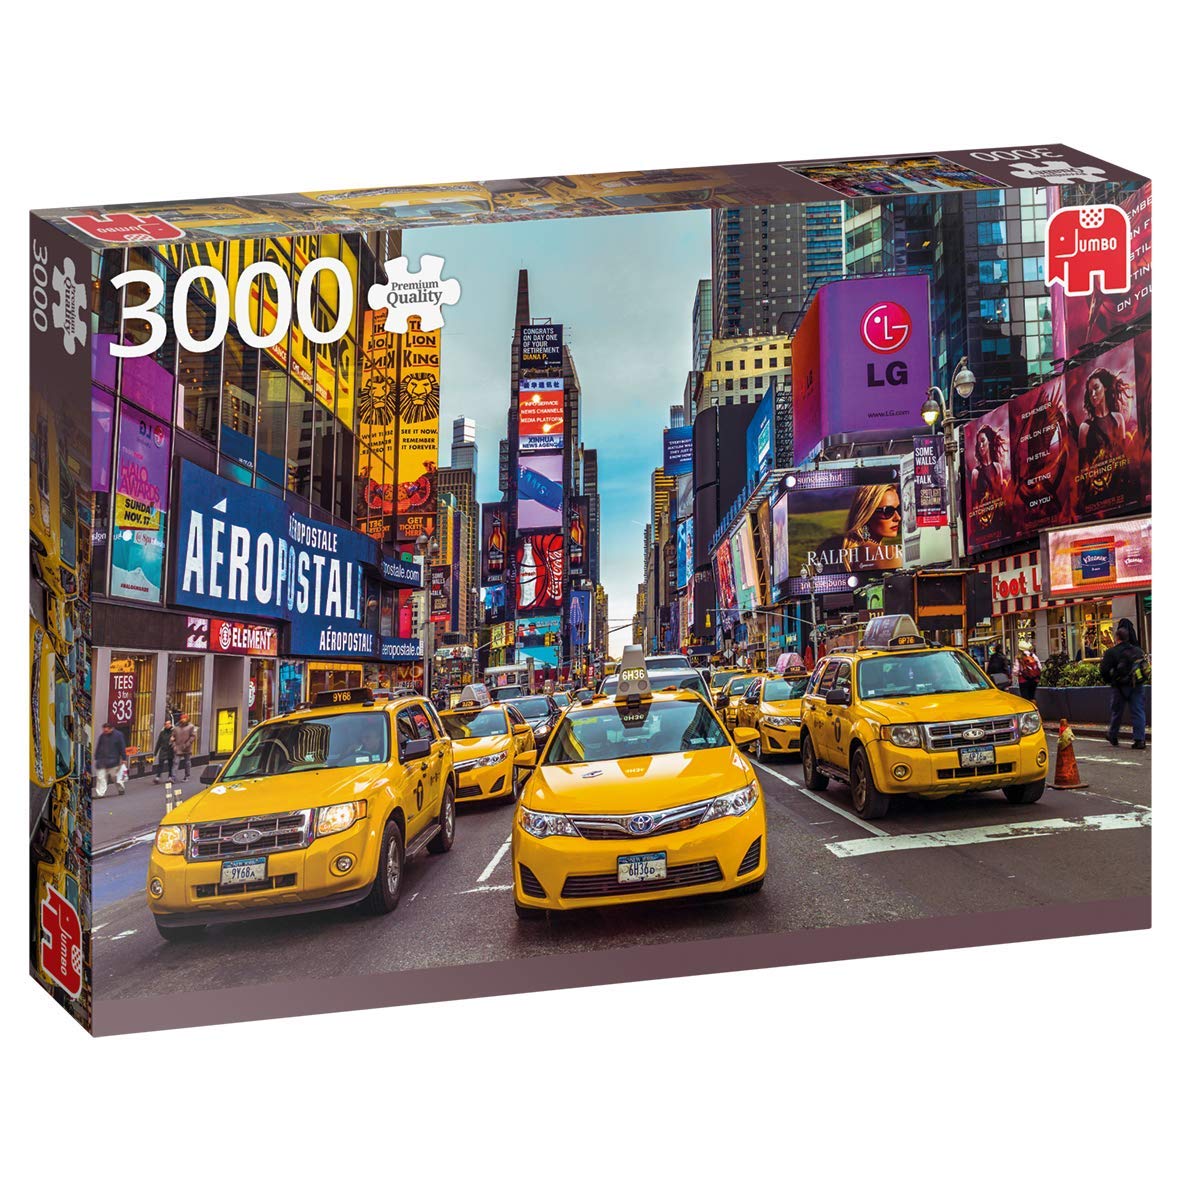 Jumbo 18832 Premium Collection – New York Taxis 3000 Teile Puzzle, Multi